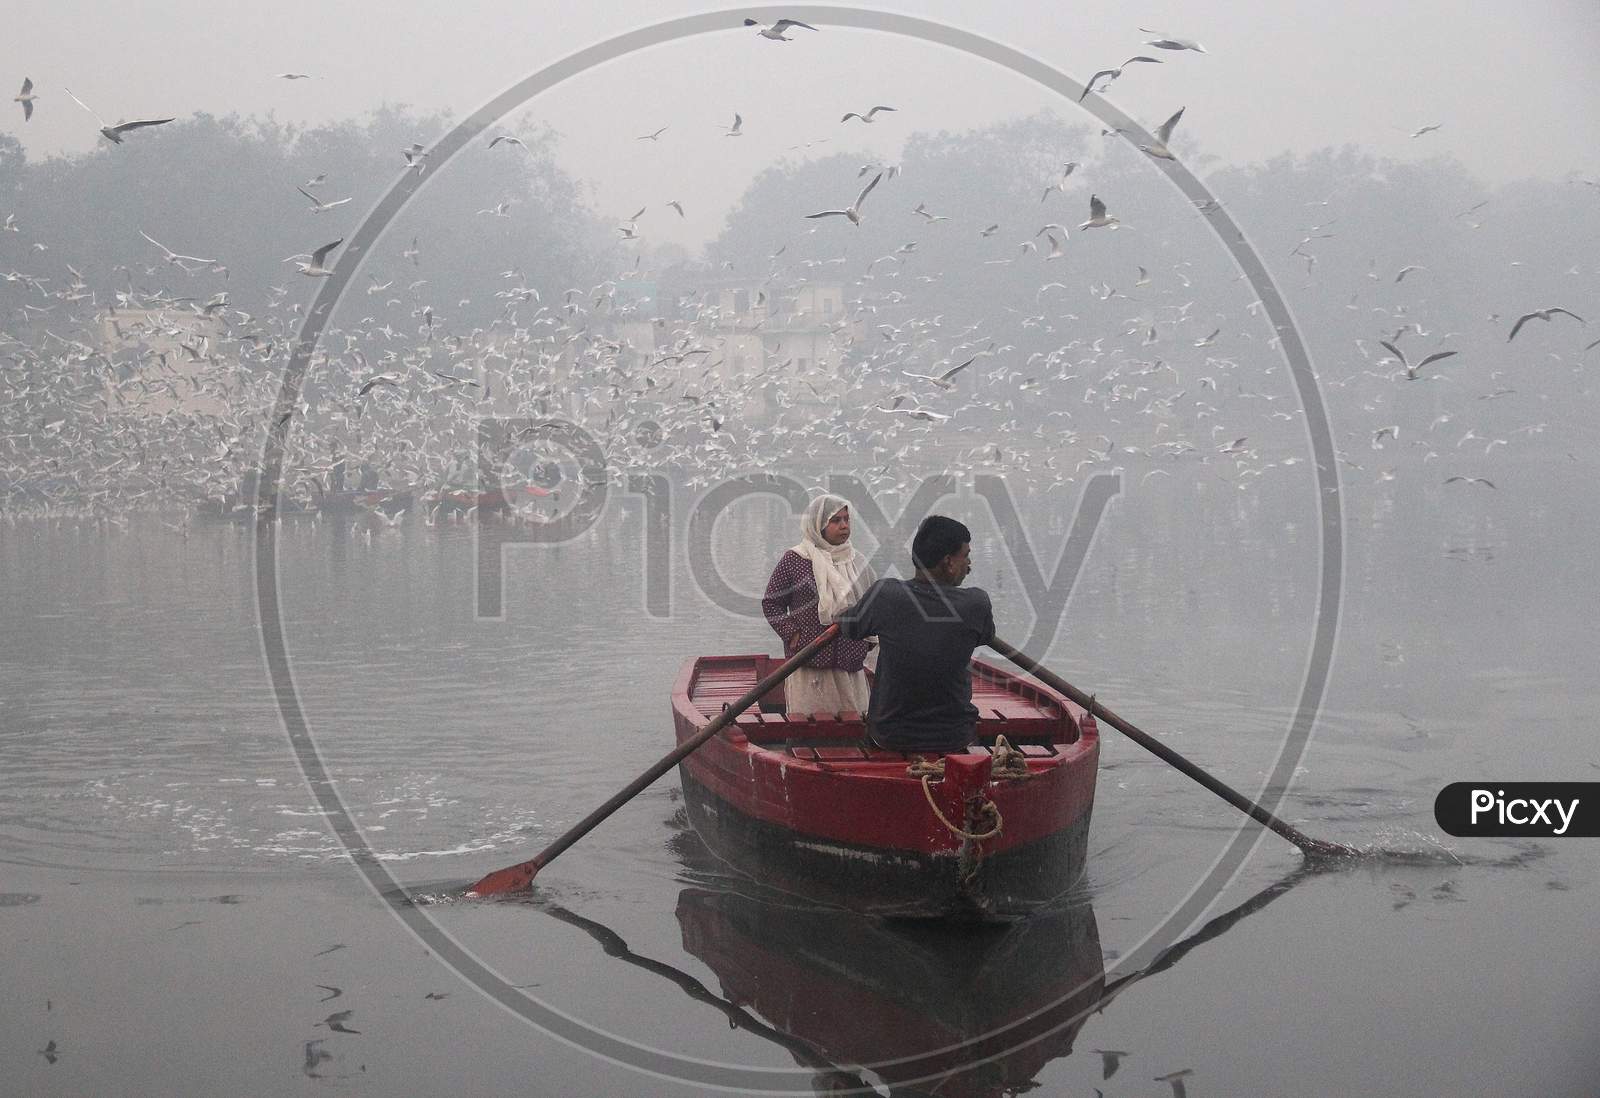 A man rides a boat as a flock of birds fly over the Yamuna river on a smoggy morning in New Delhi, November 9, 2020.